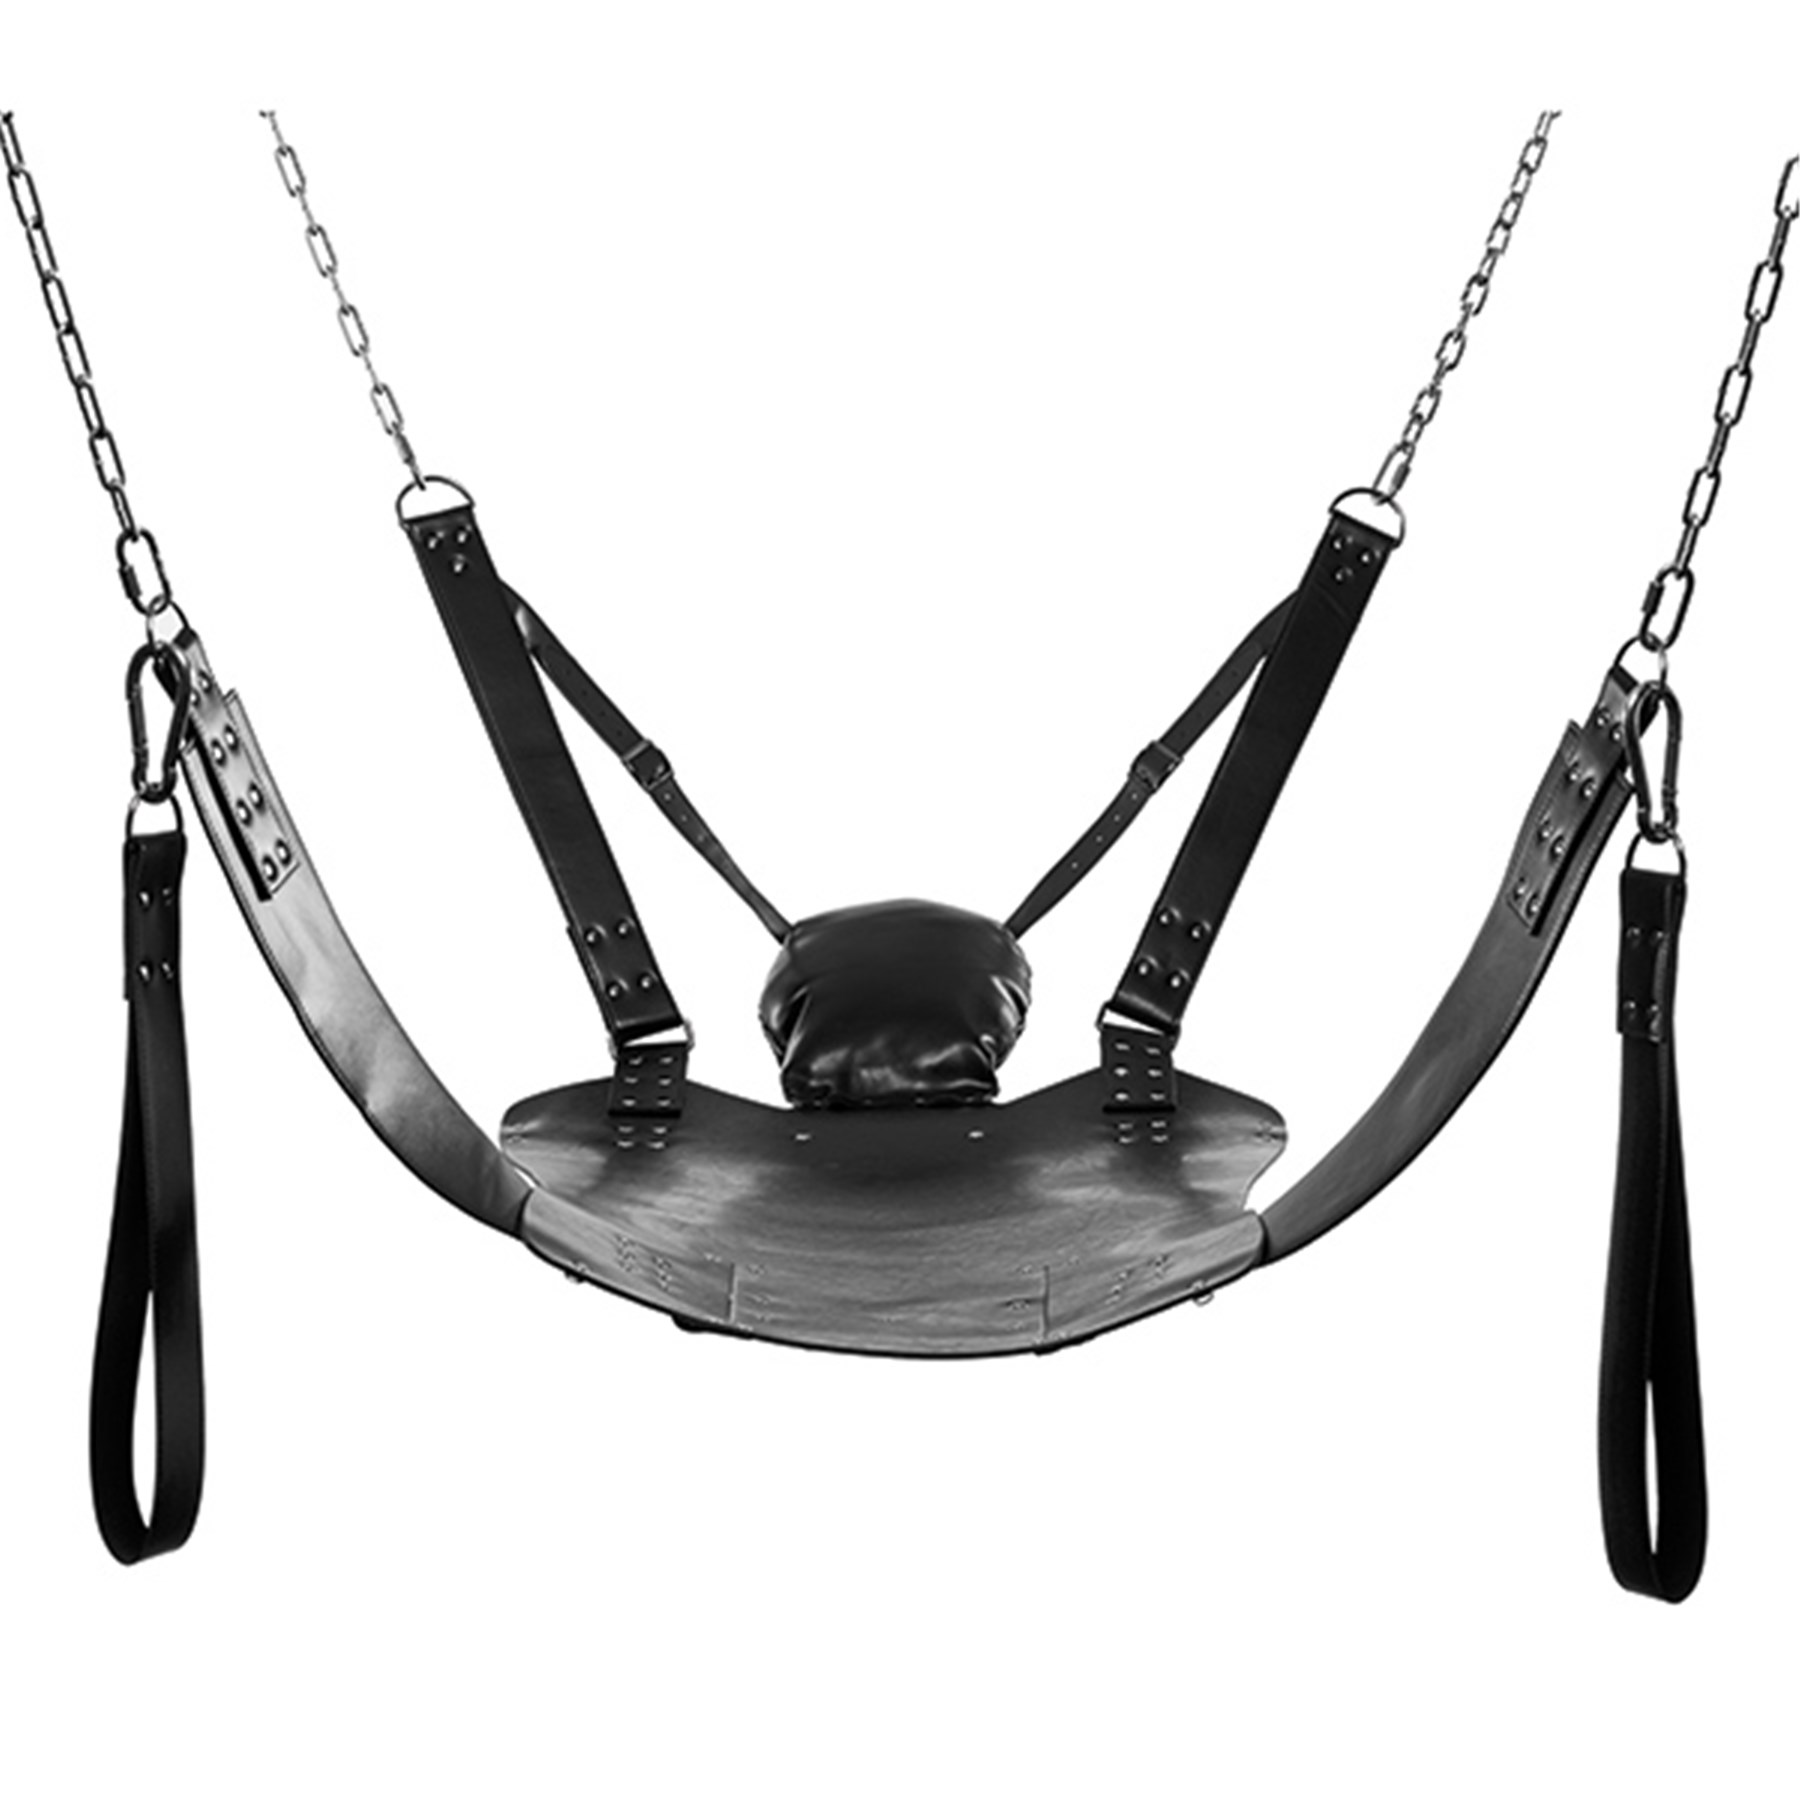 Extreme Sling hanging from support chains (not included)